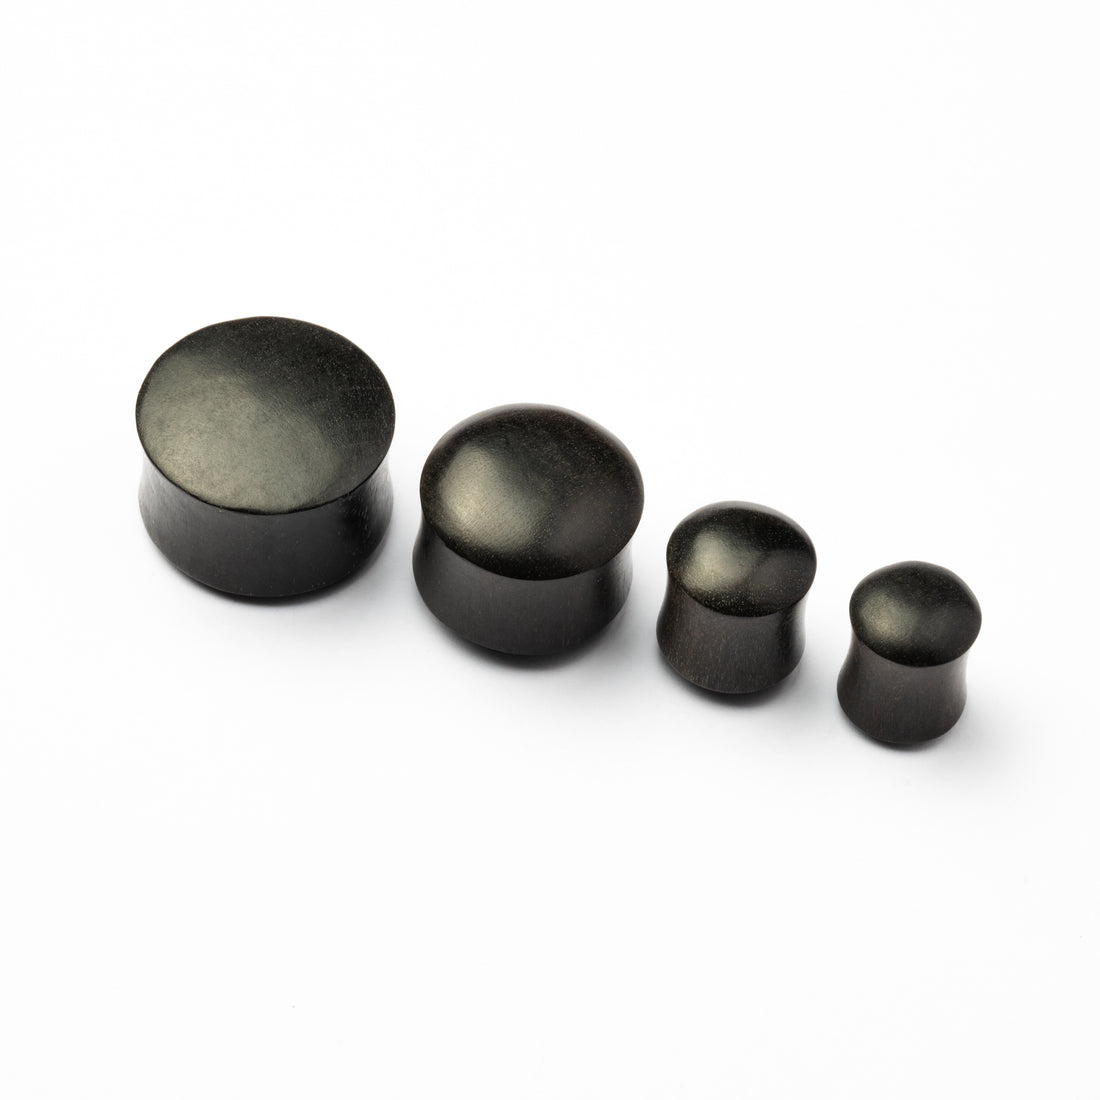 Several sizes of smooth black wood plugs front side view